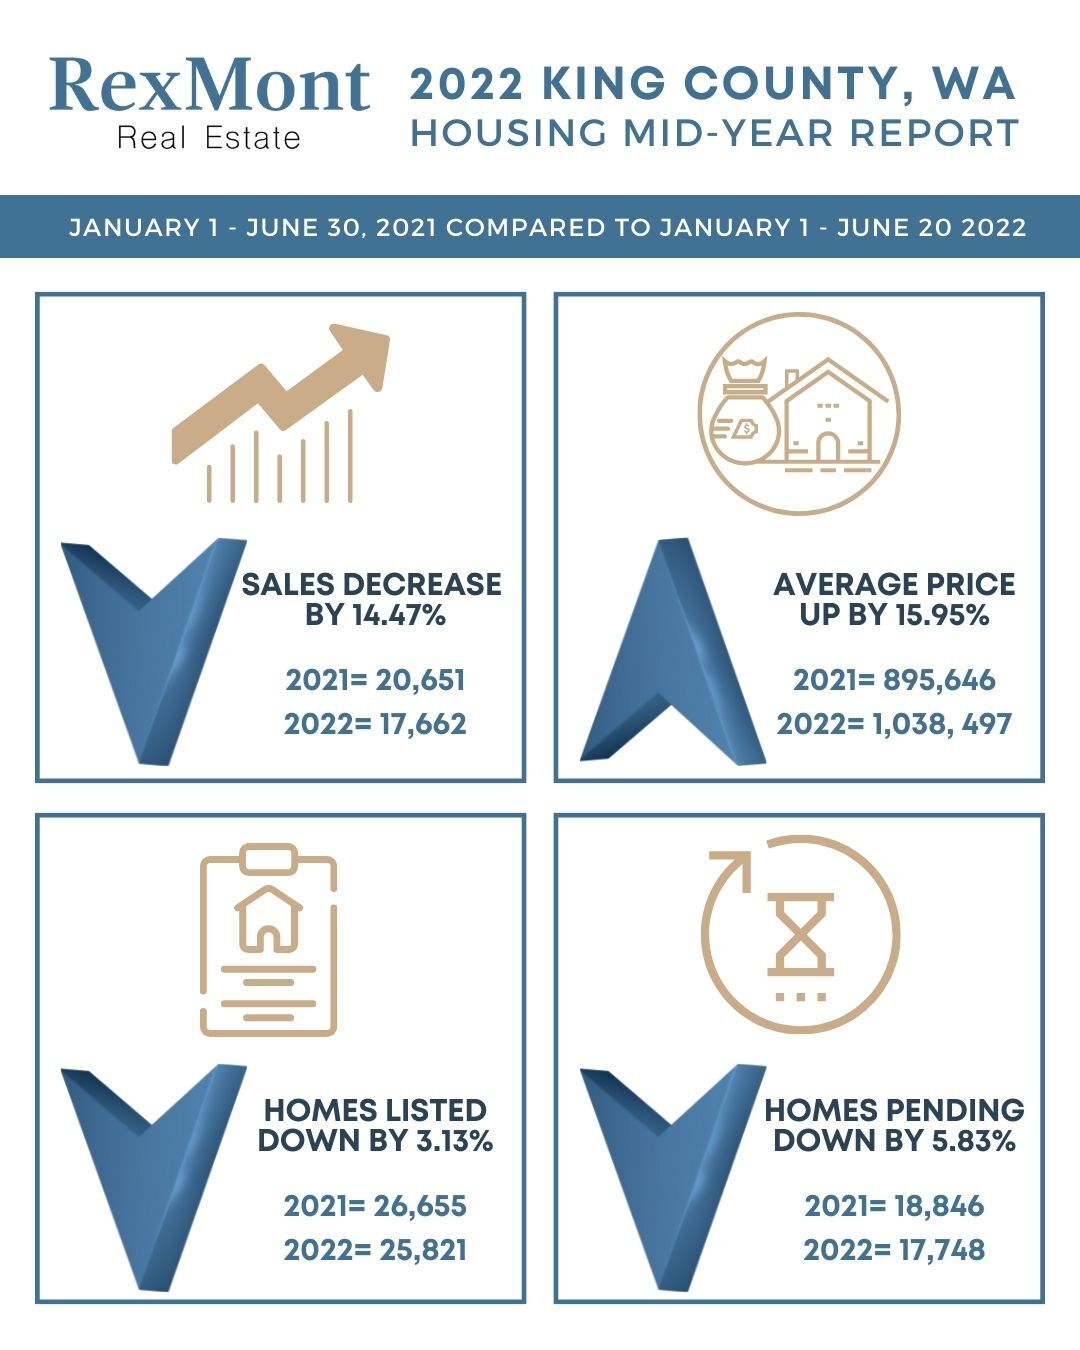 King County Midyear Report for the Real Estate Market